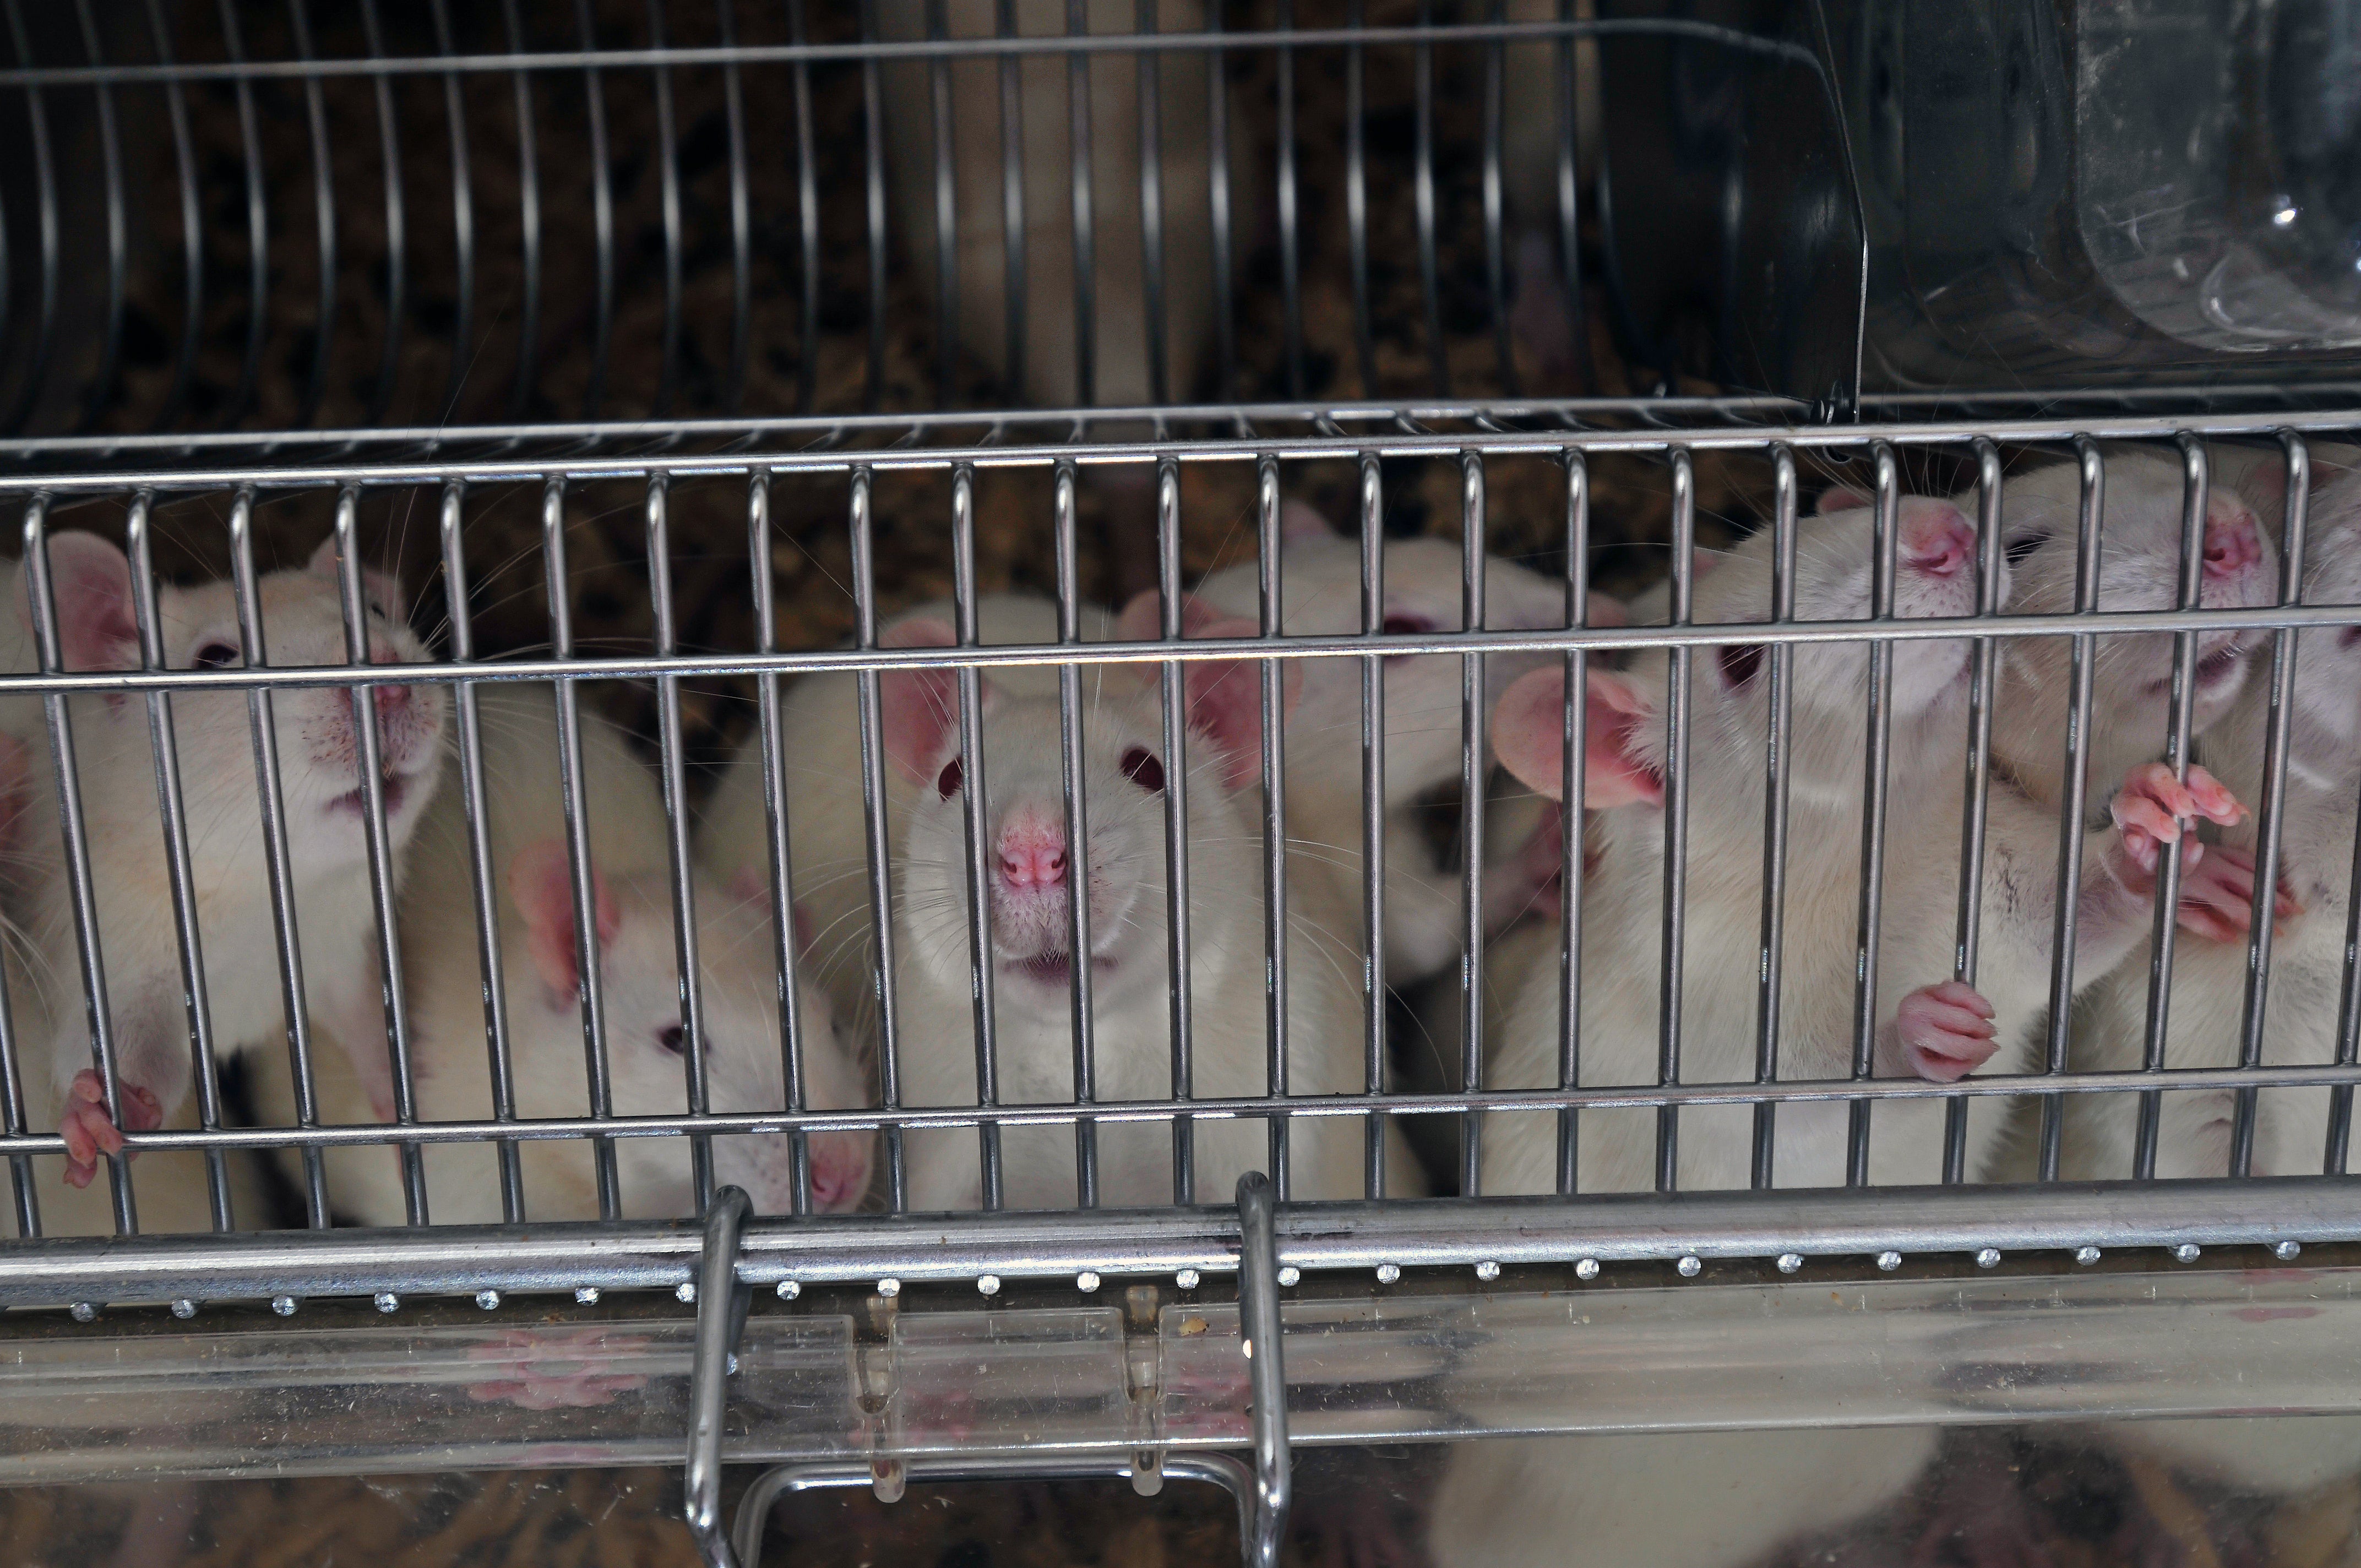 Severe pain endured by nearly half of monkeys and mice in Korean labs as  animal use increases - Humane Society International